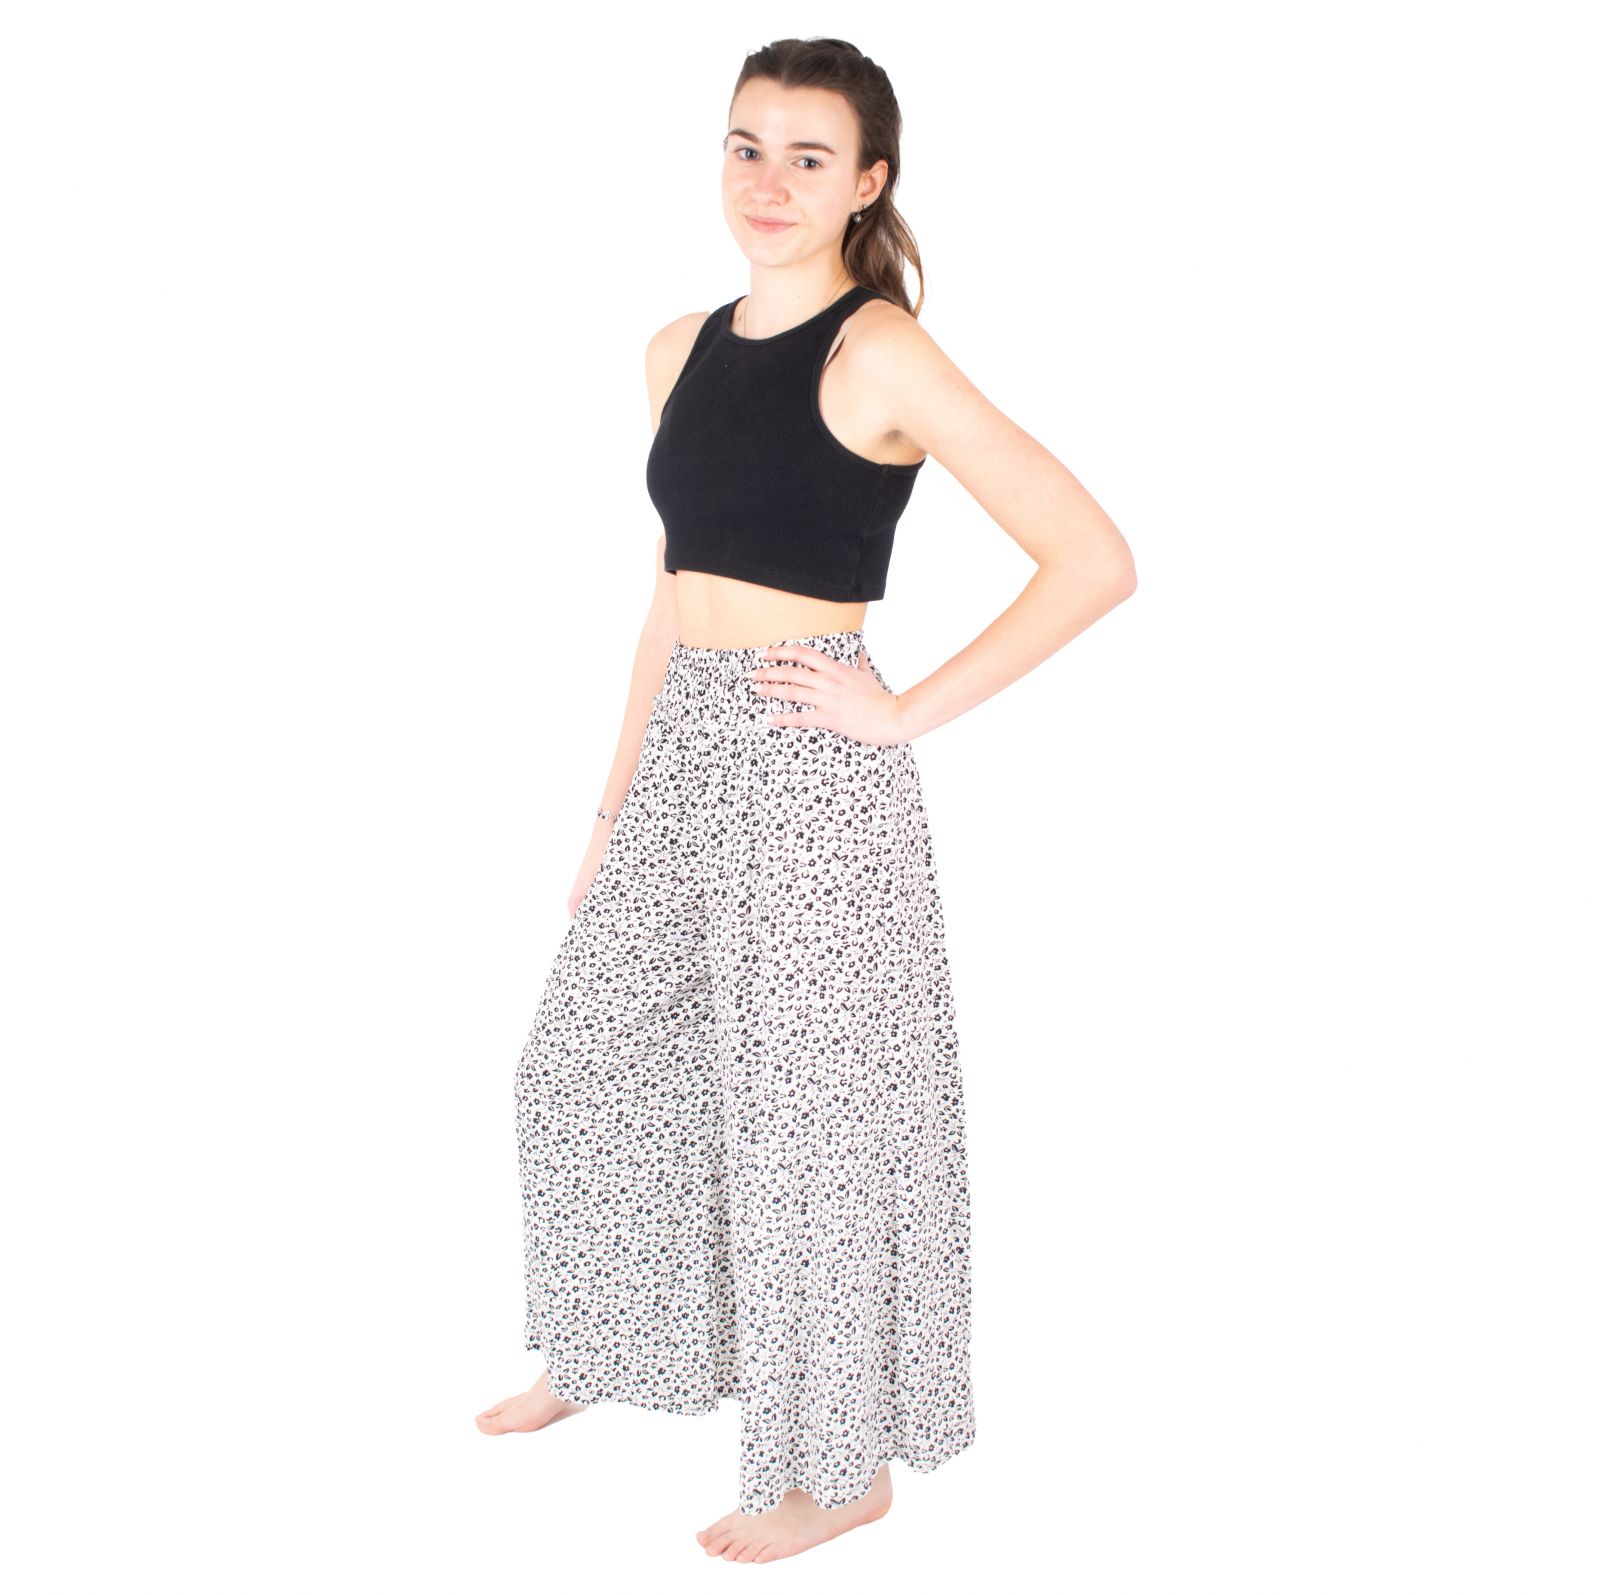 Black and white trouser skirt / culottes Ciara Quinby Thailand